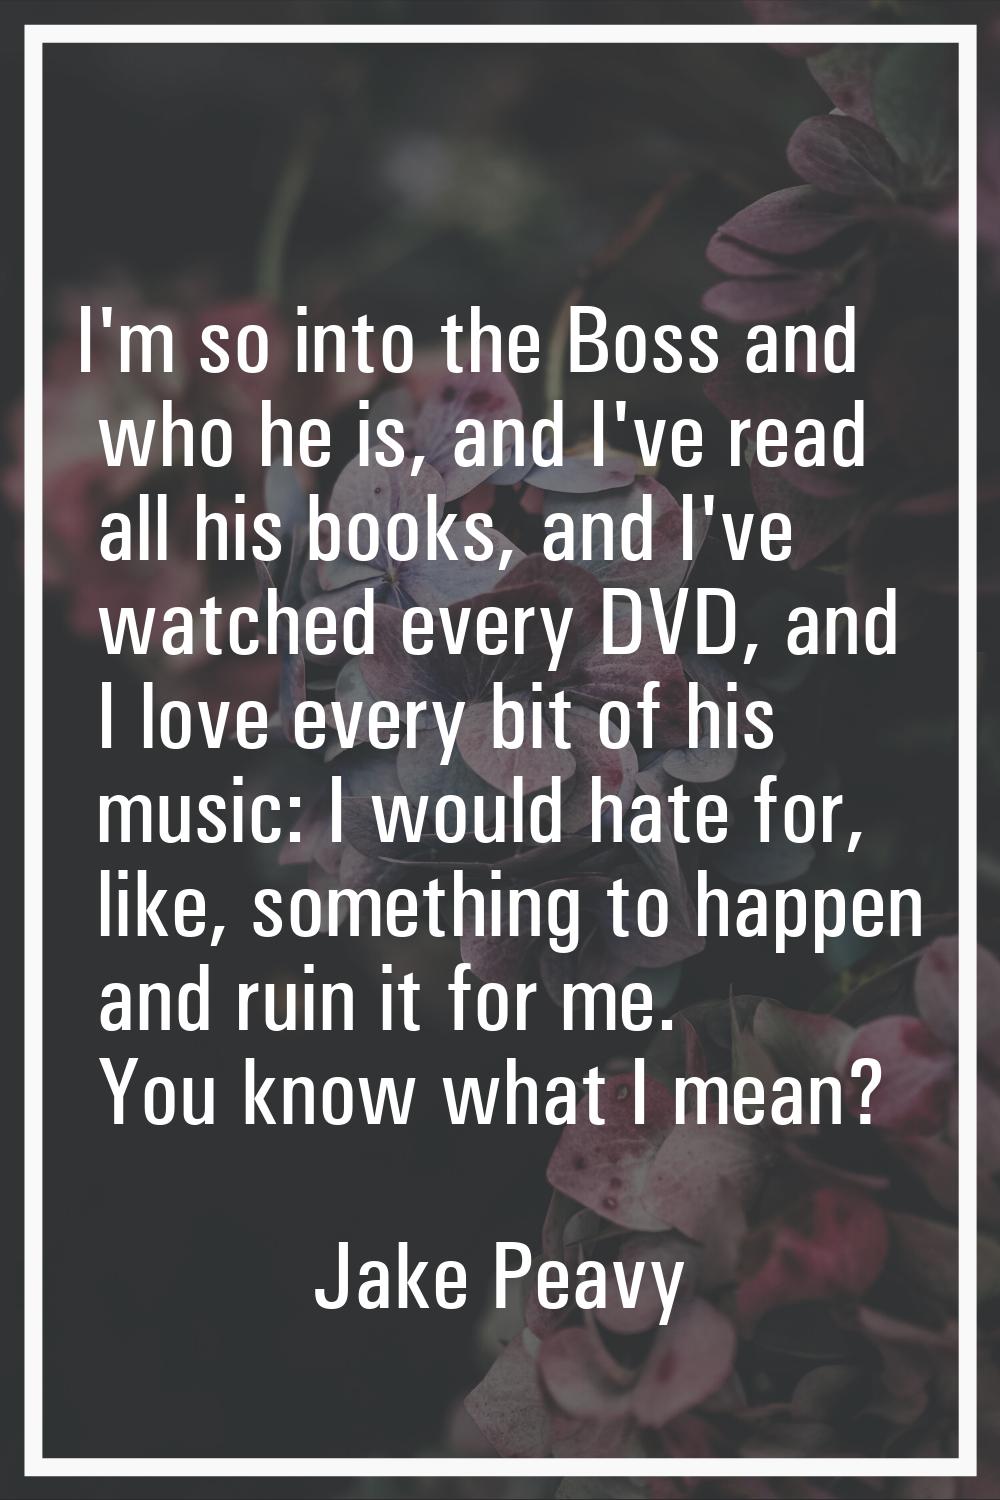 I'm so into the Boss and who he is, and I've read all his books, and I've watched every DVD, and I 